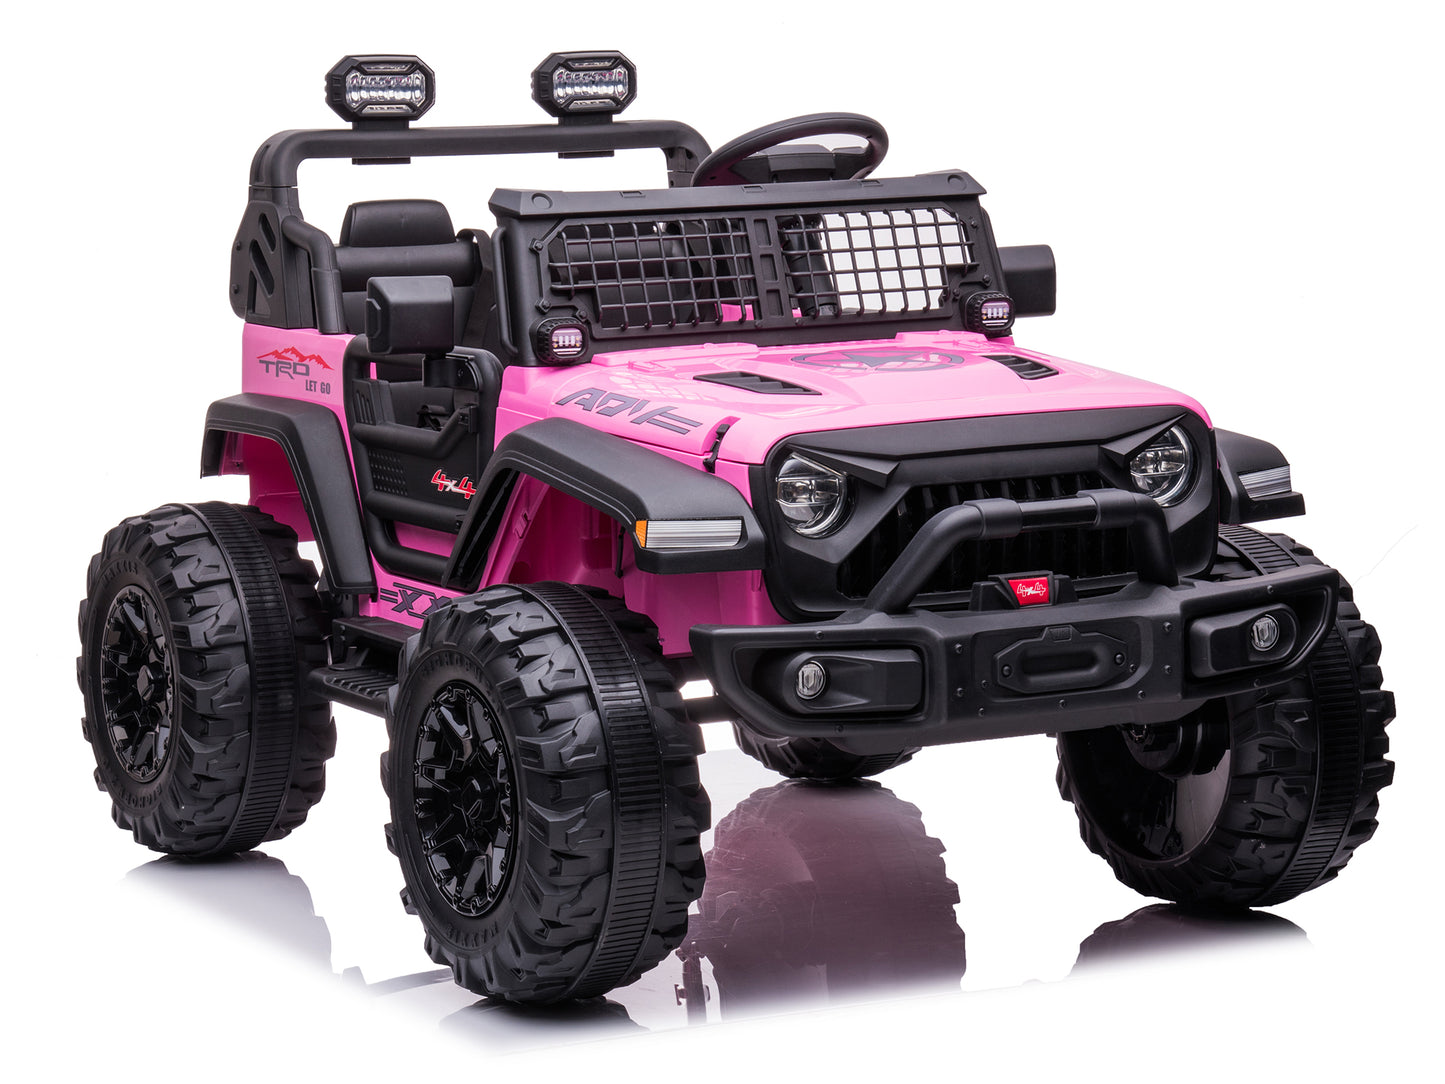 RIDINGTON 24V Kids Ride-On Truck With Remote Control - Pink